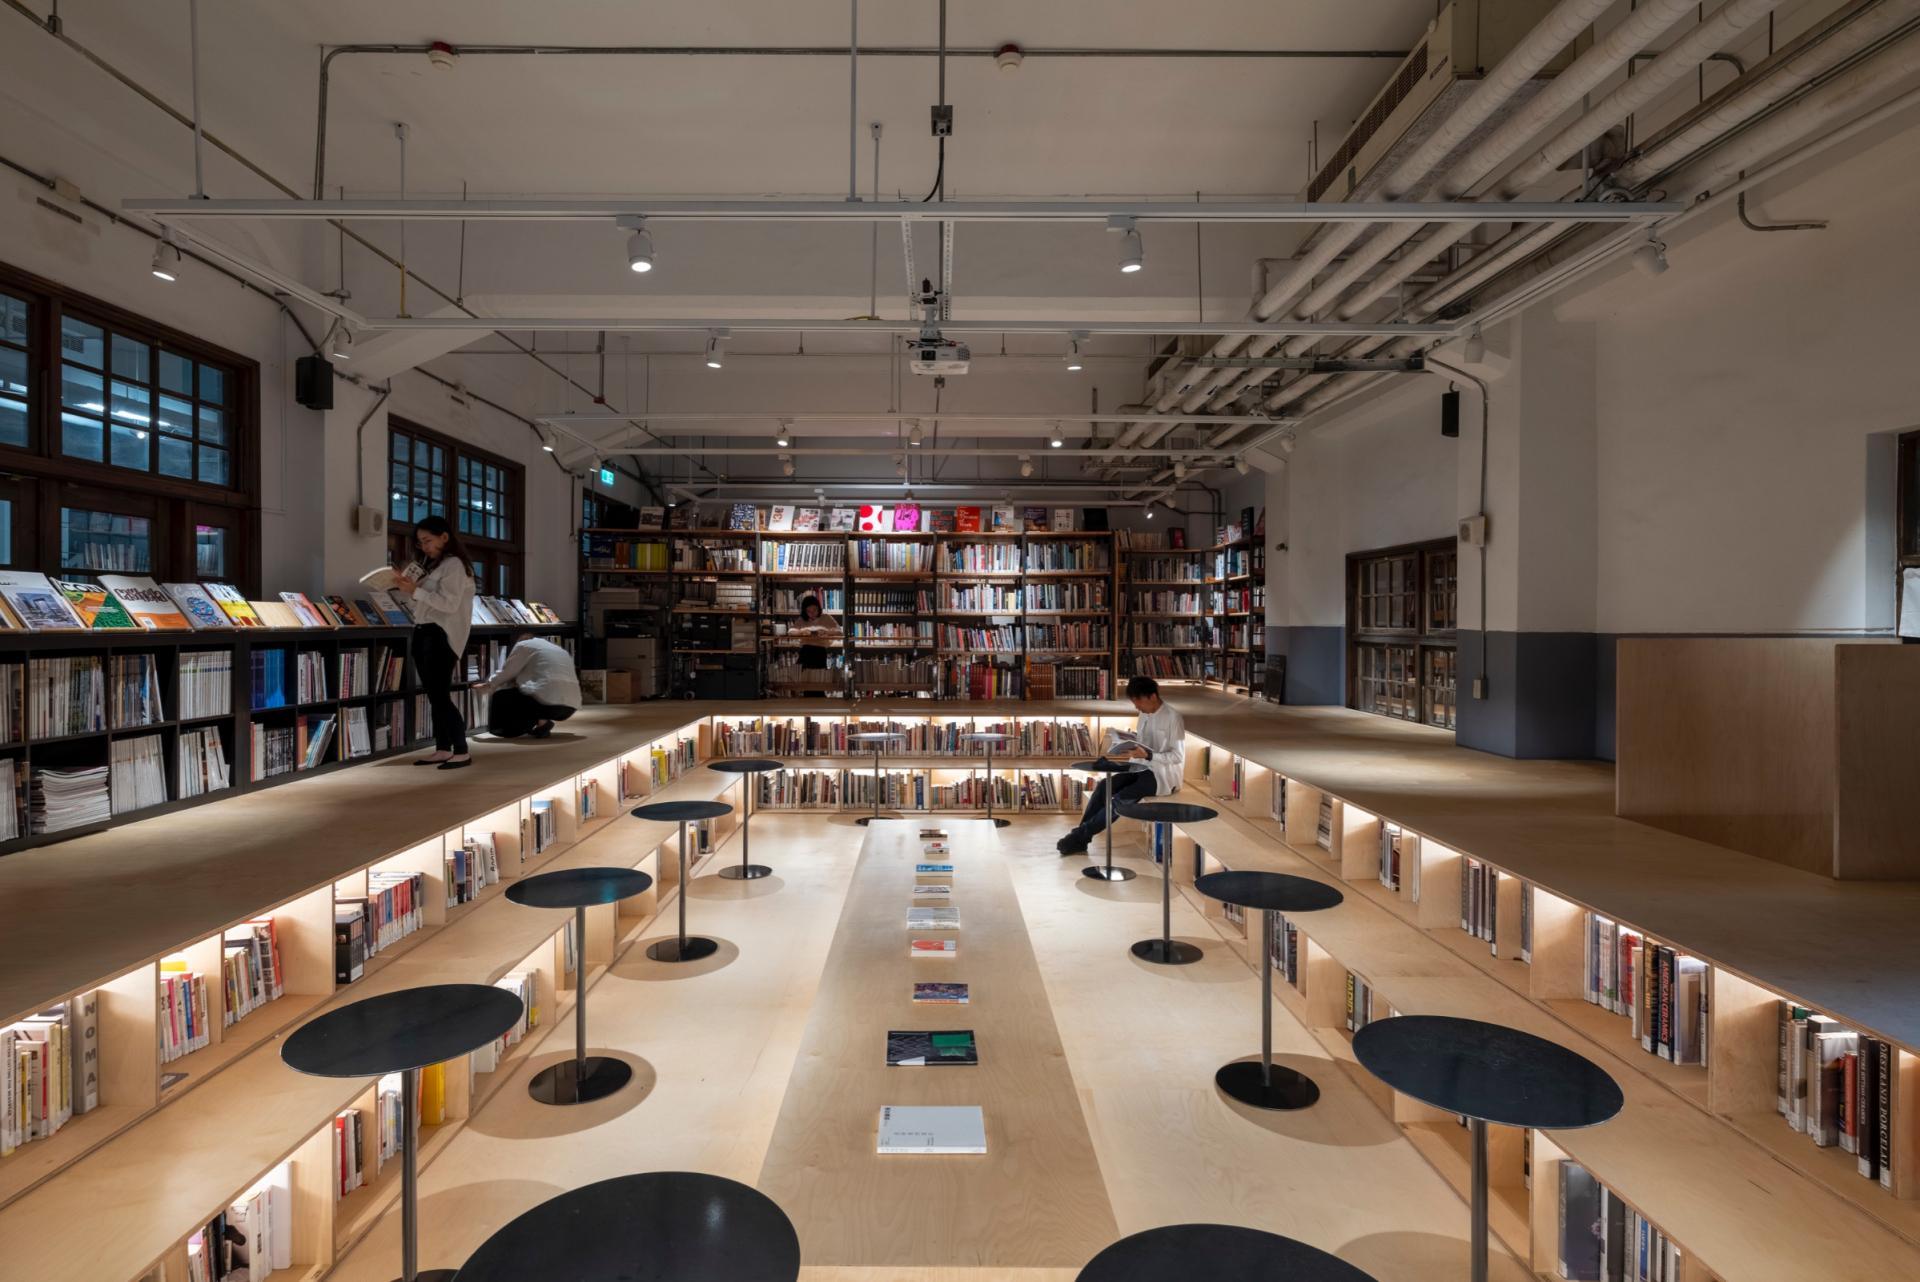 An 83-year-old Taipei bathhouse is transformed into a library and cultural venue